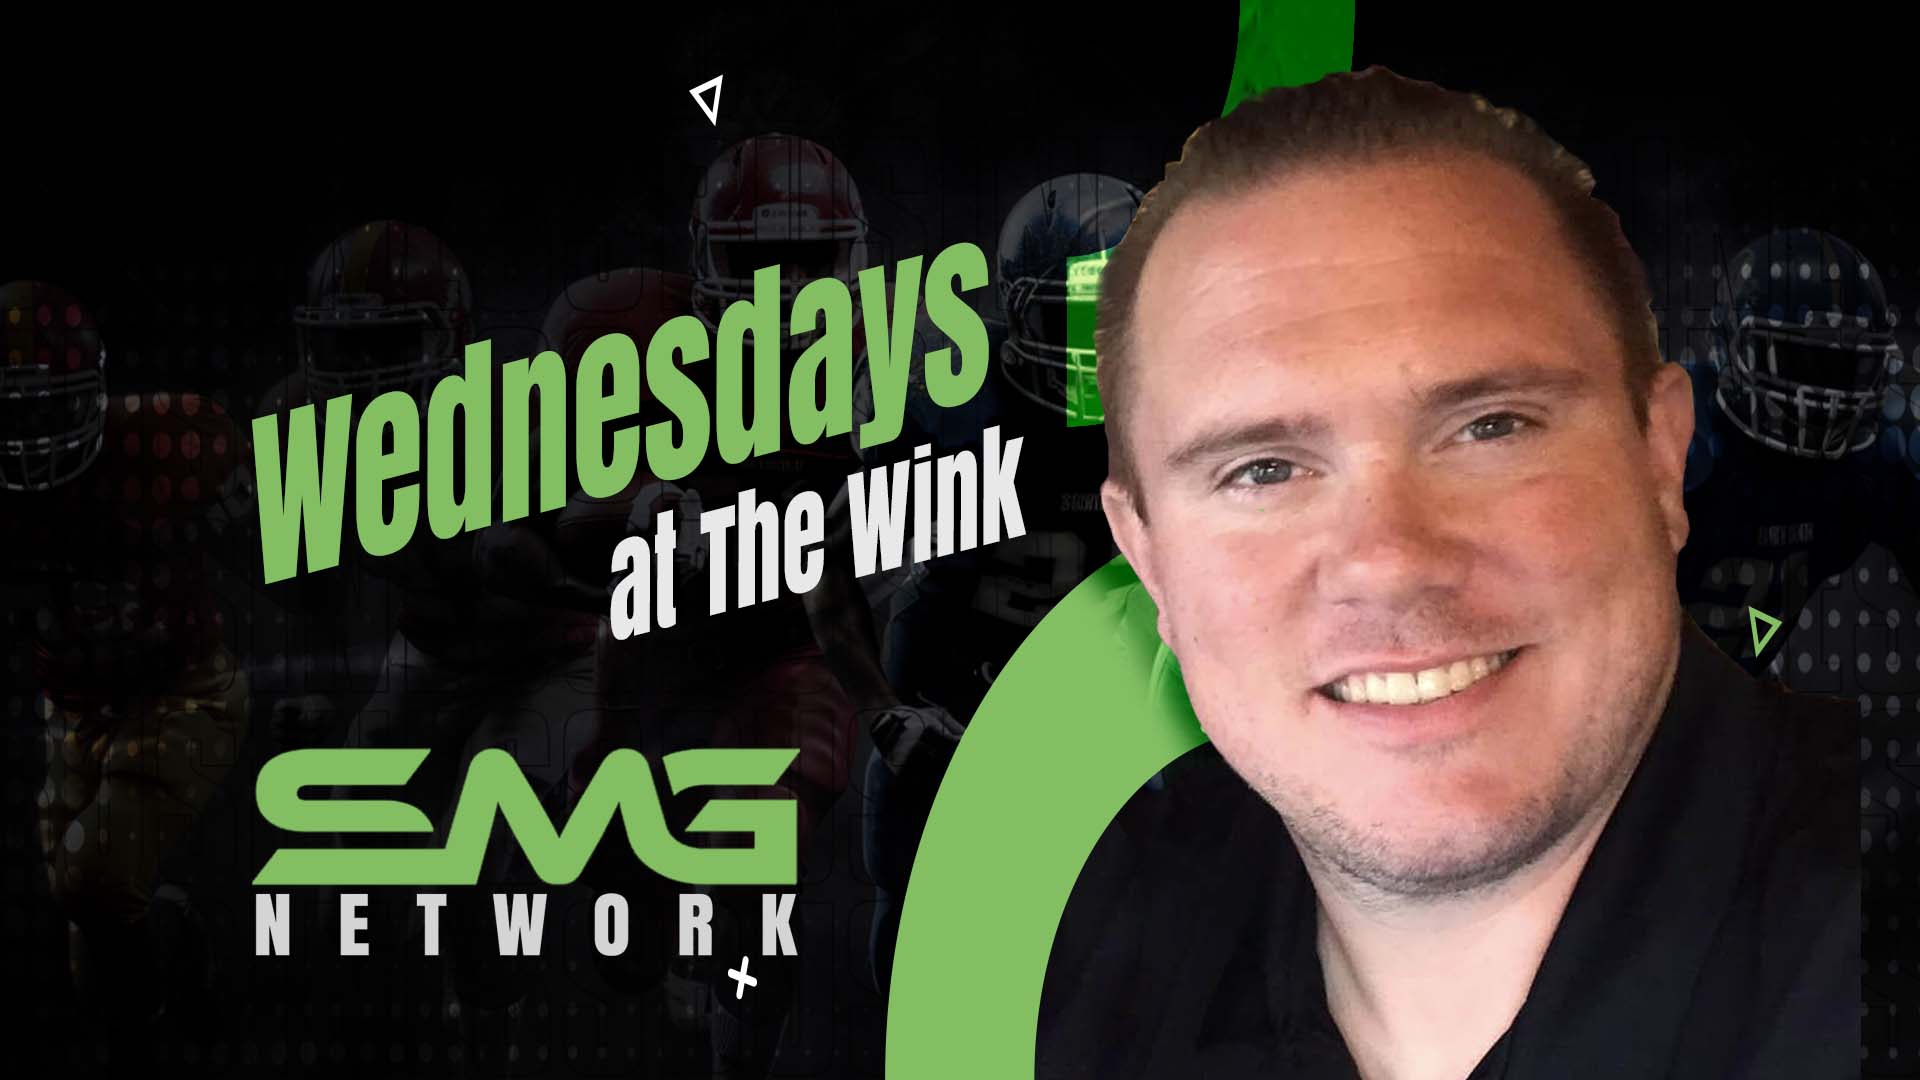 Wednesdays at The Wink